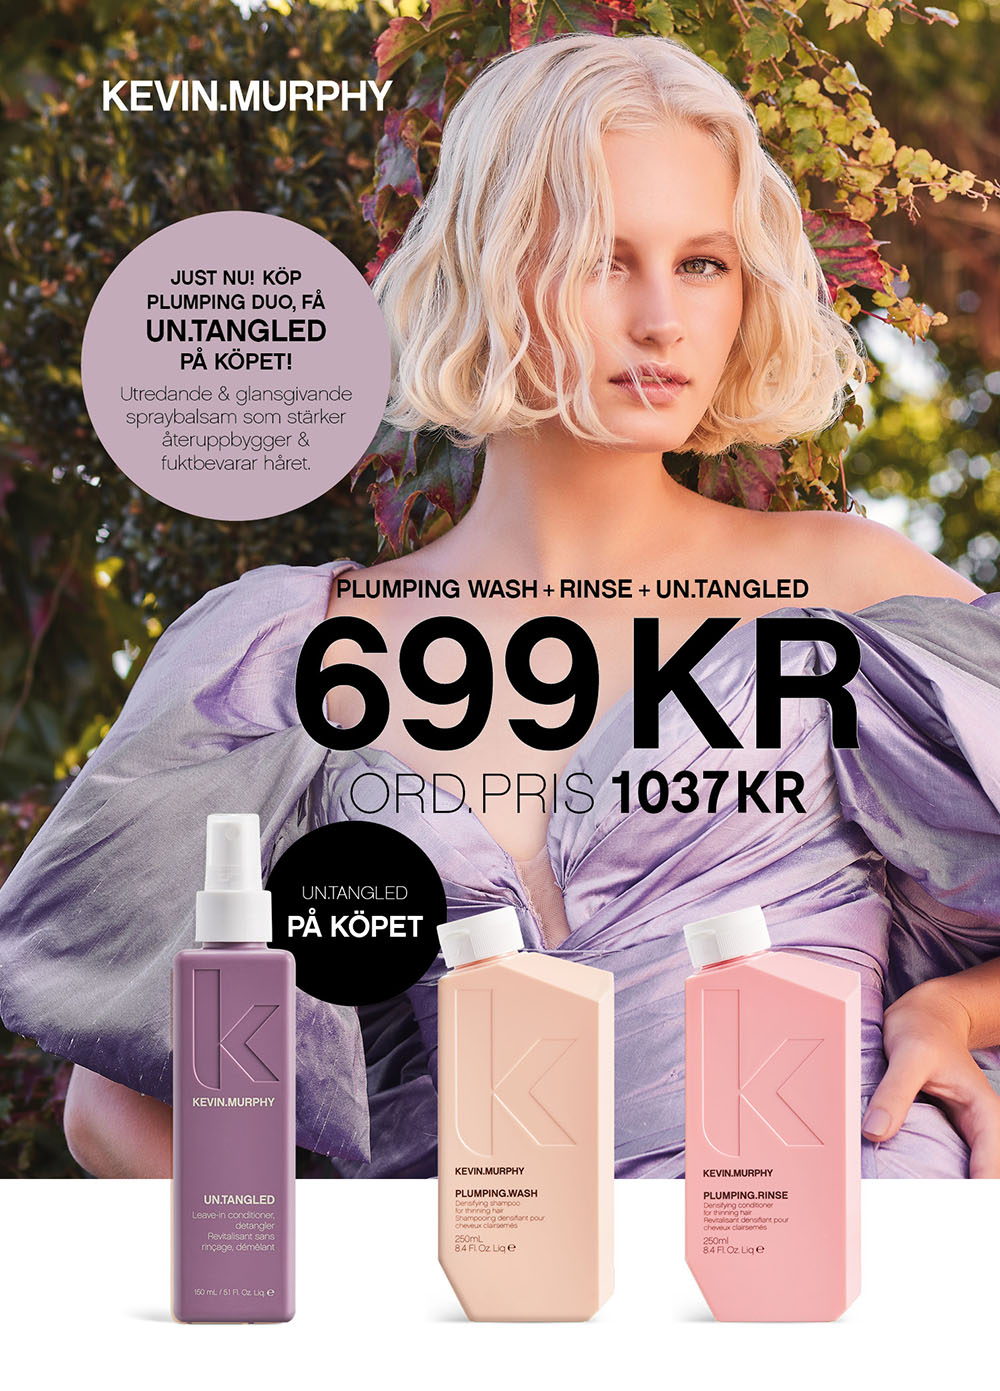 Kevin Murphy Plumping Duo + Un.Tangled p kpet! - Hairsale.se